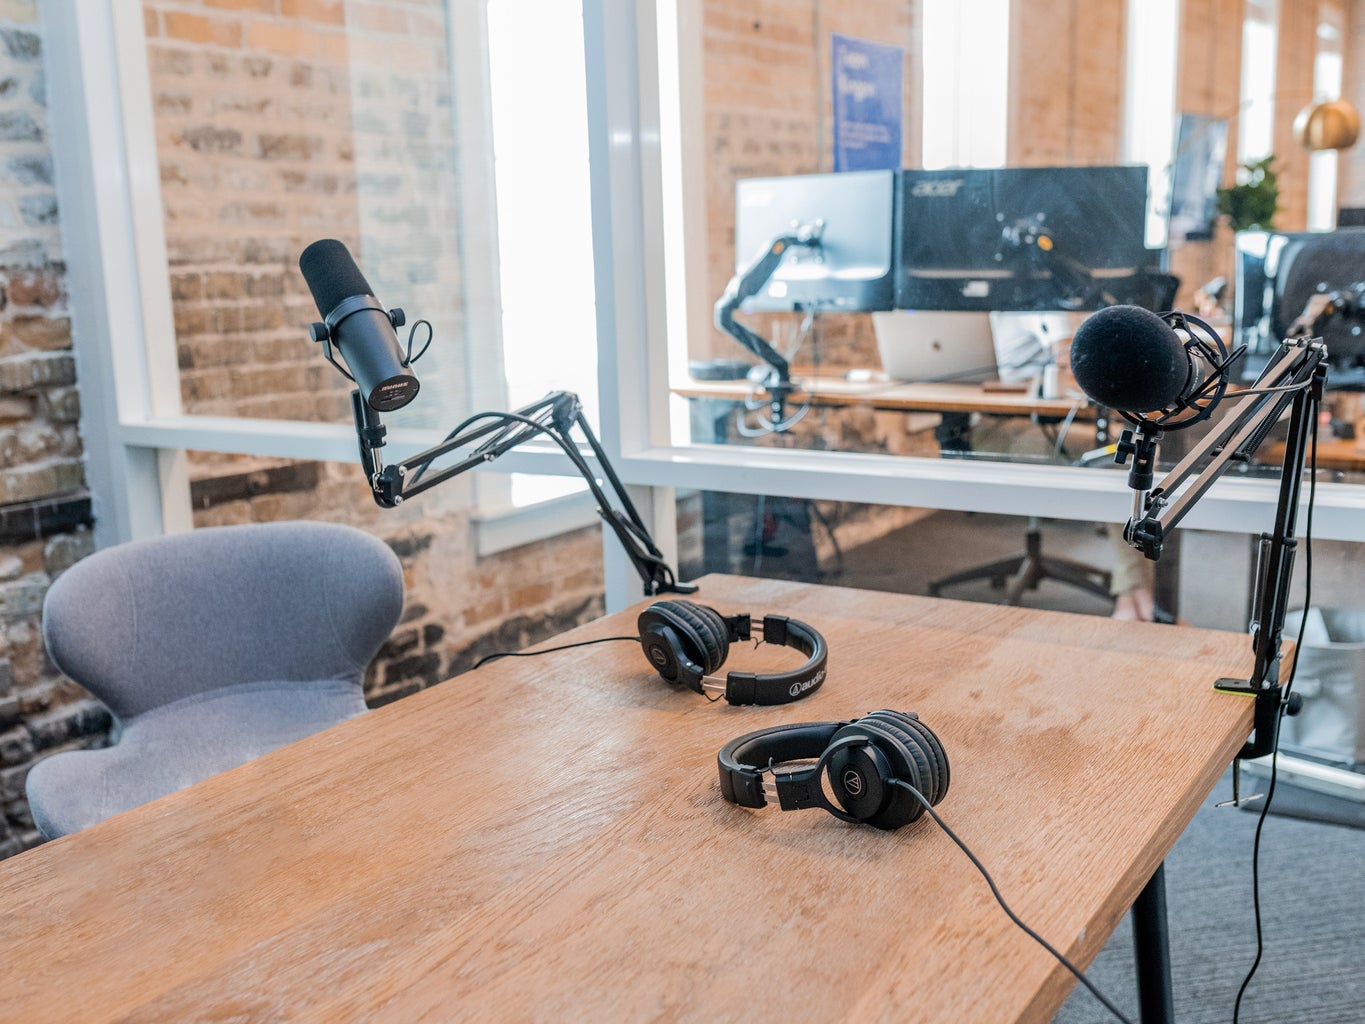 podcast setup on a wooden table